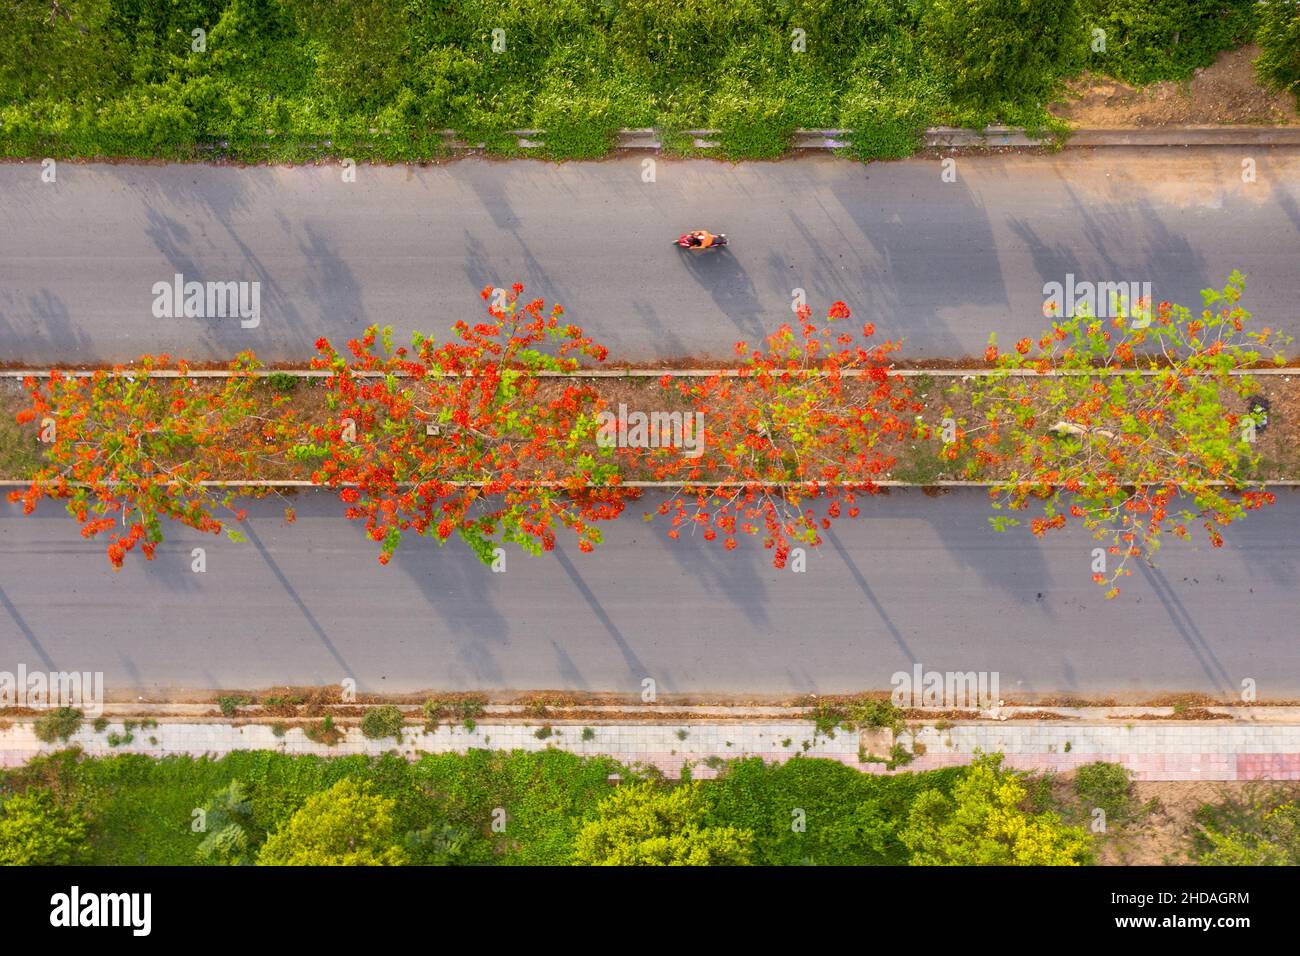 Phoenix flowers are blooming red on the streets of Vinh Long, Vietnam Stock Photo